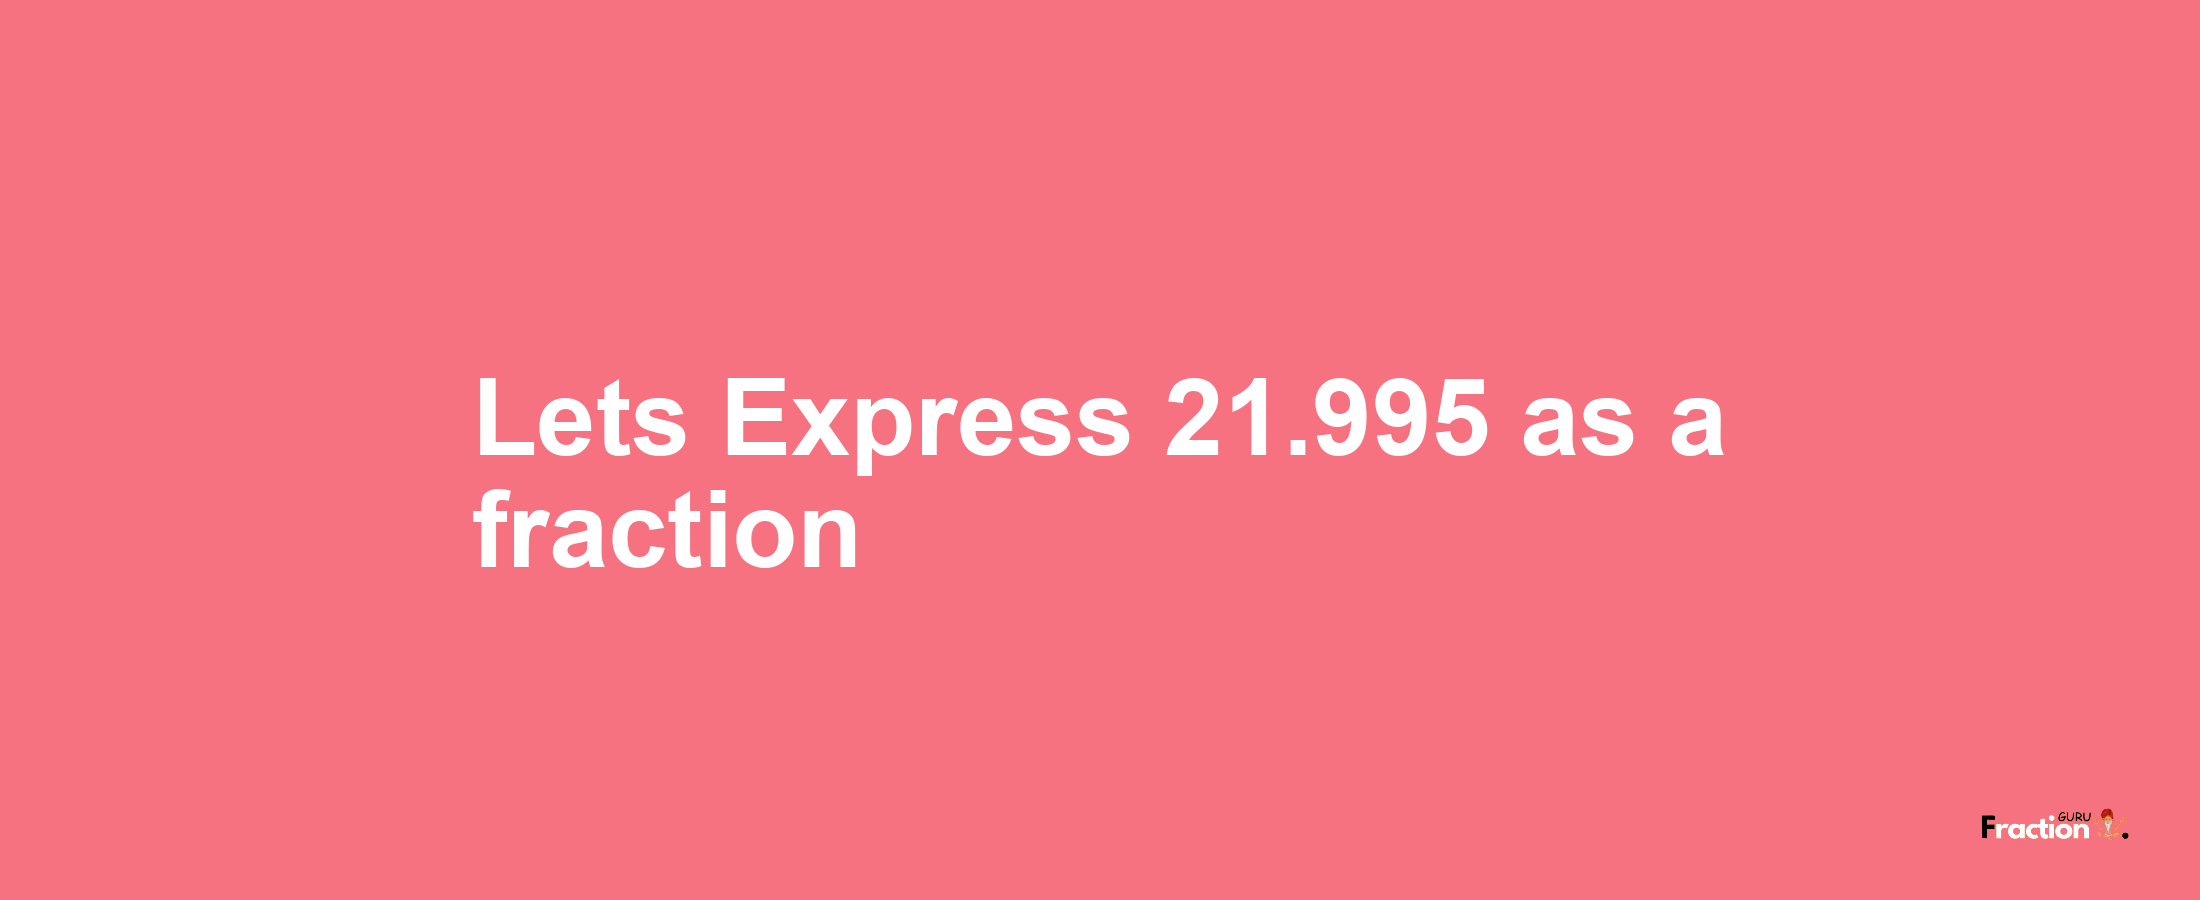 Lets Express 21.995 as afraction